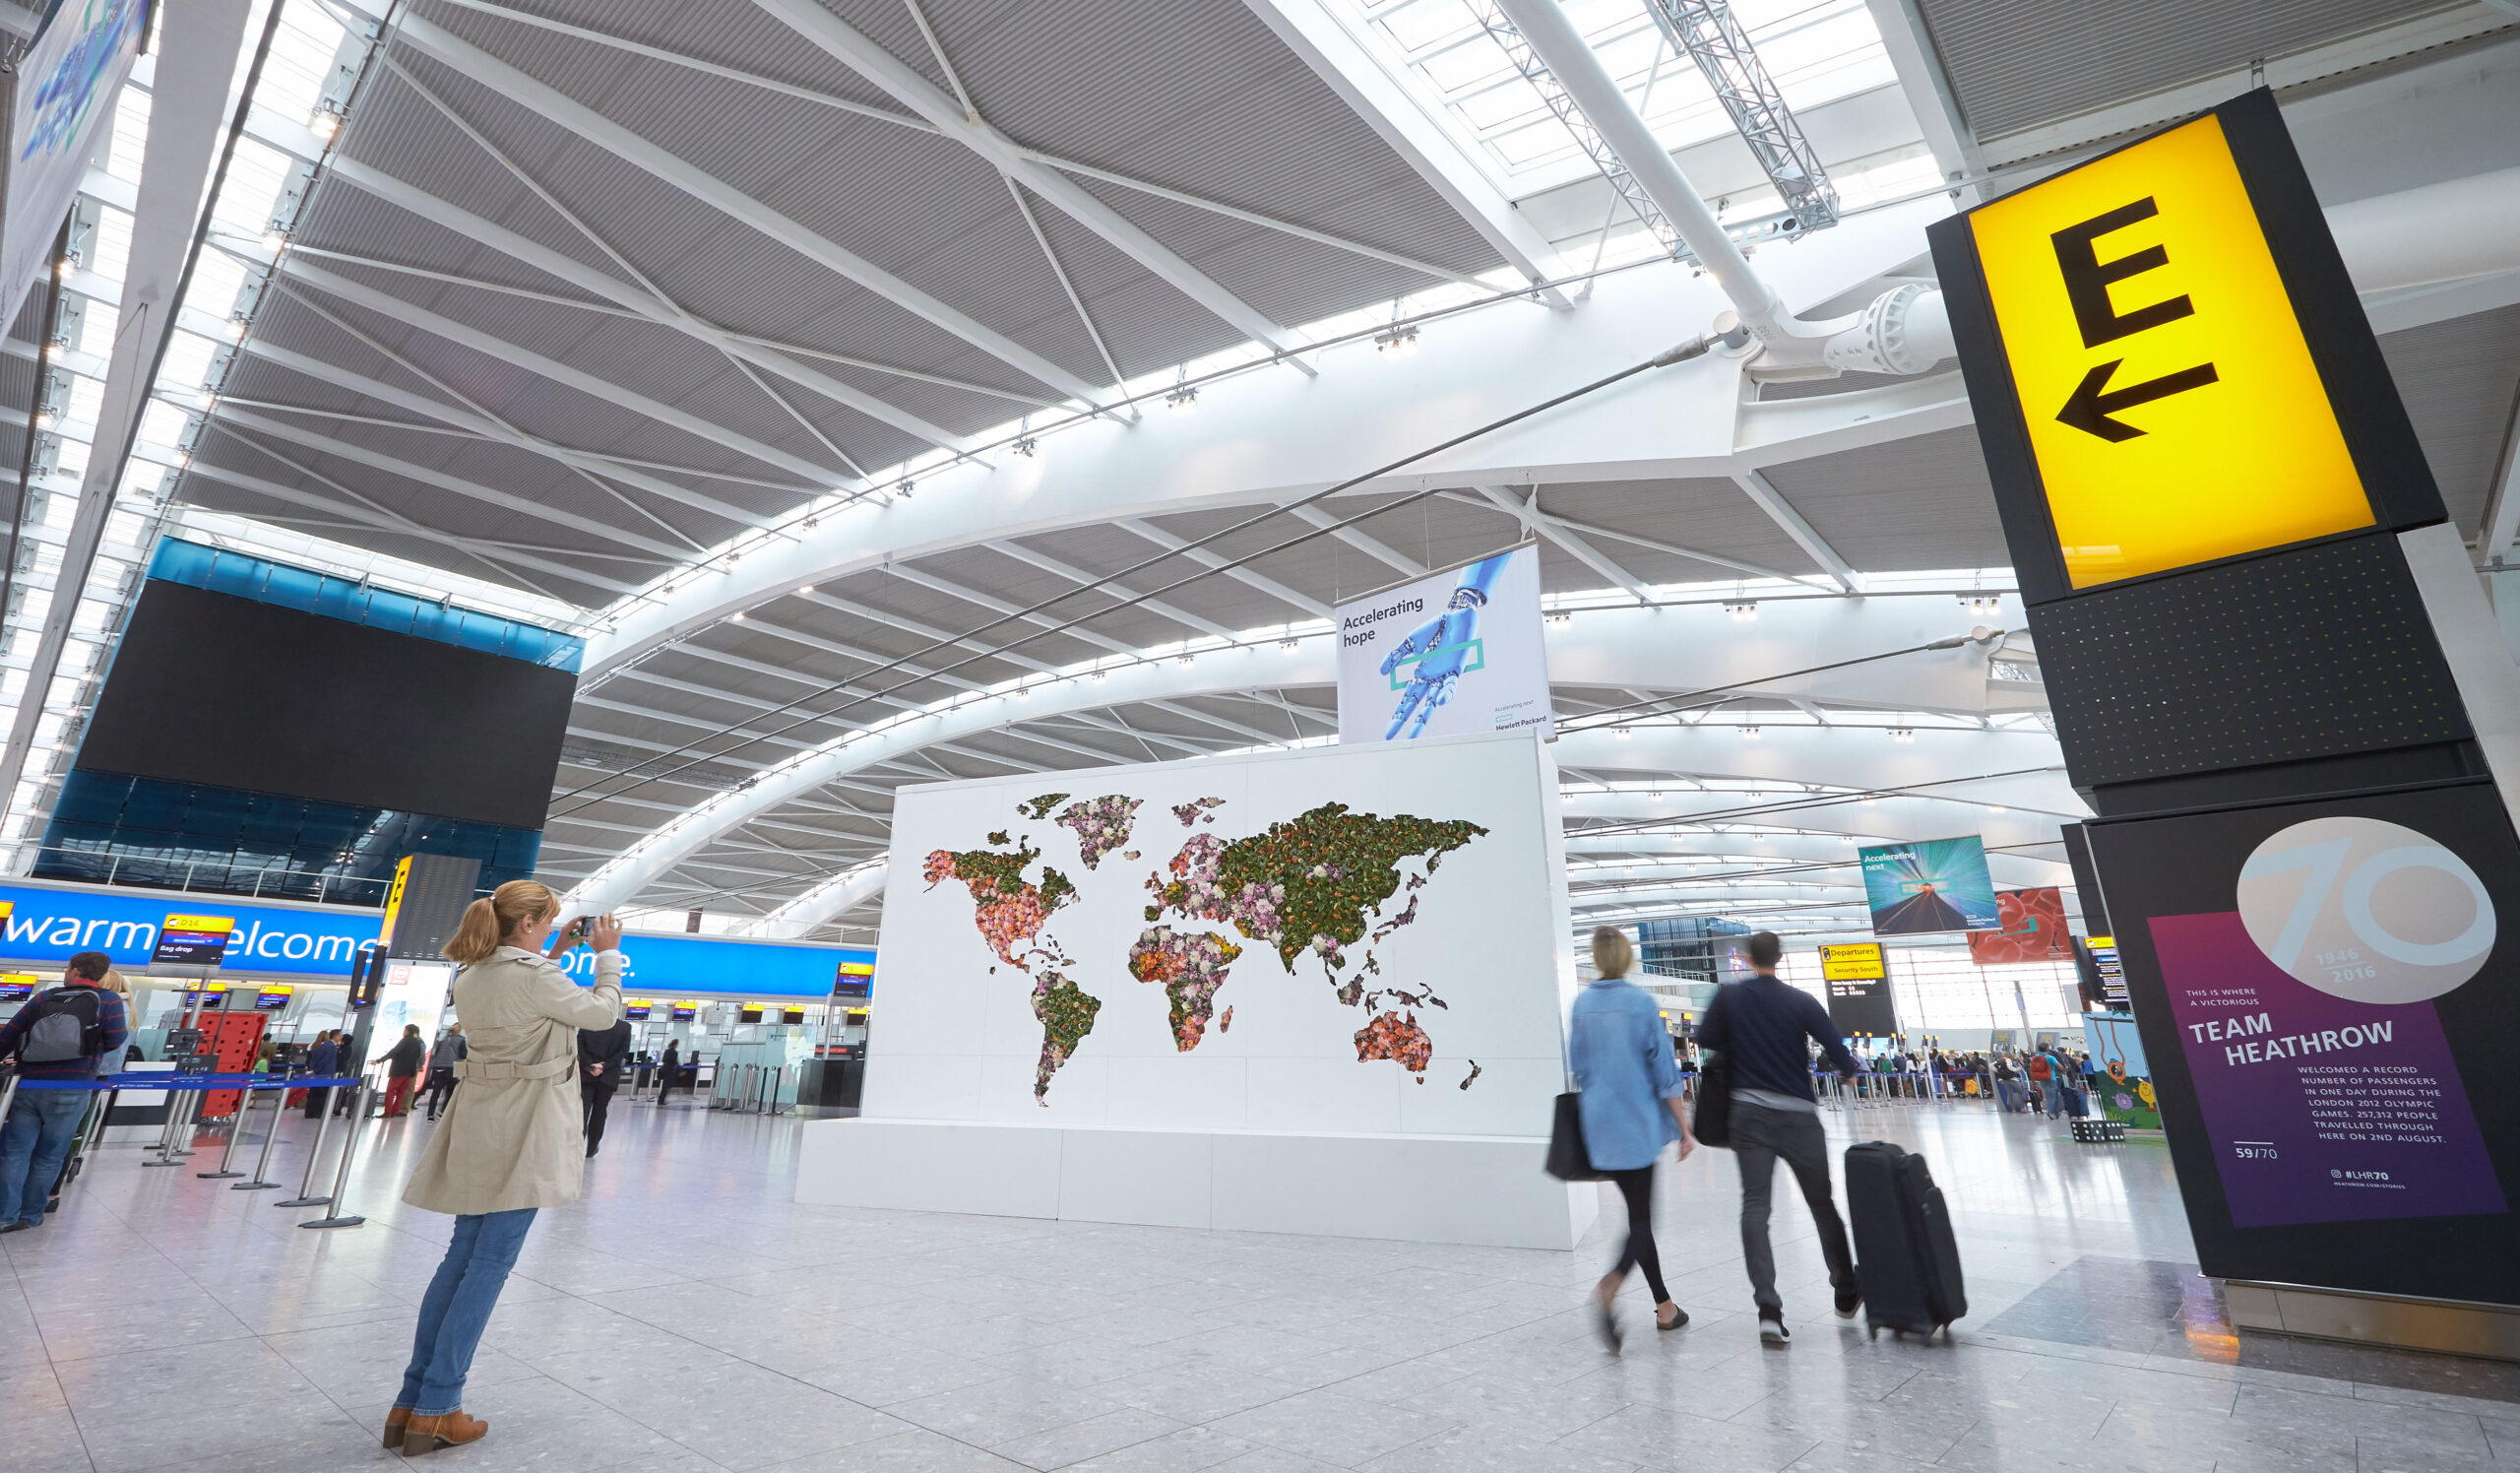 A giant floral map of the world is unveiled at Heathrow to celebrate the airportÕs new global fragrance report. The map is 11 ft. by 18ft and uses around 2,000 fresh flower stems and showcases the most popular scents by country en vogue right now, as well as celebrating the new season fragrances. BBZ/REX/SHUTTERSTOCK